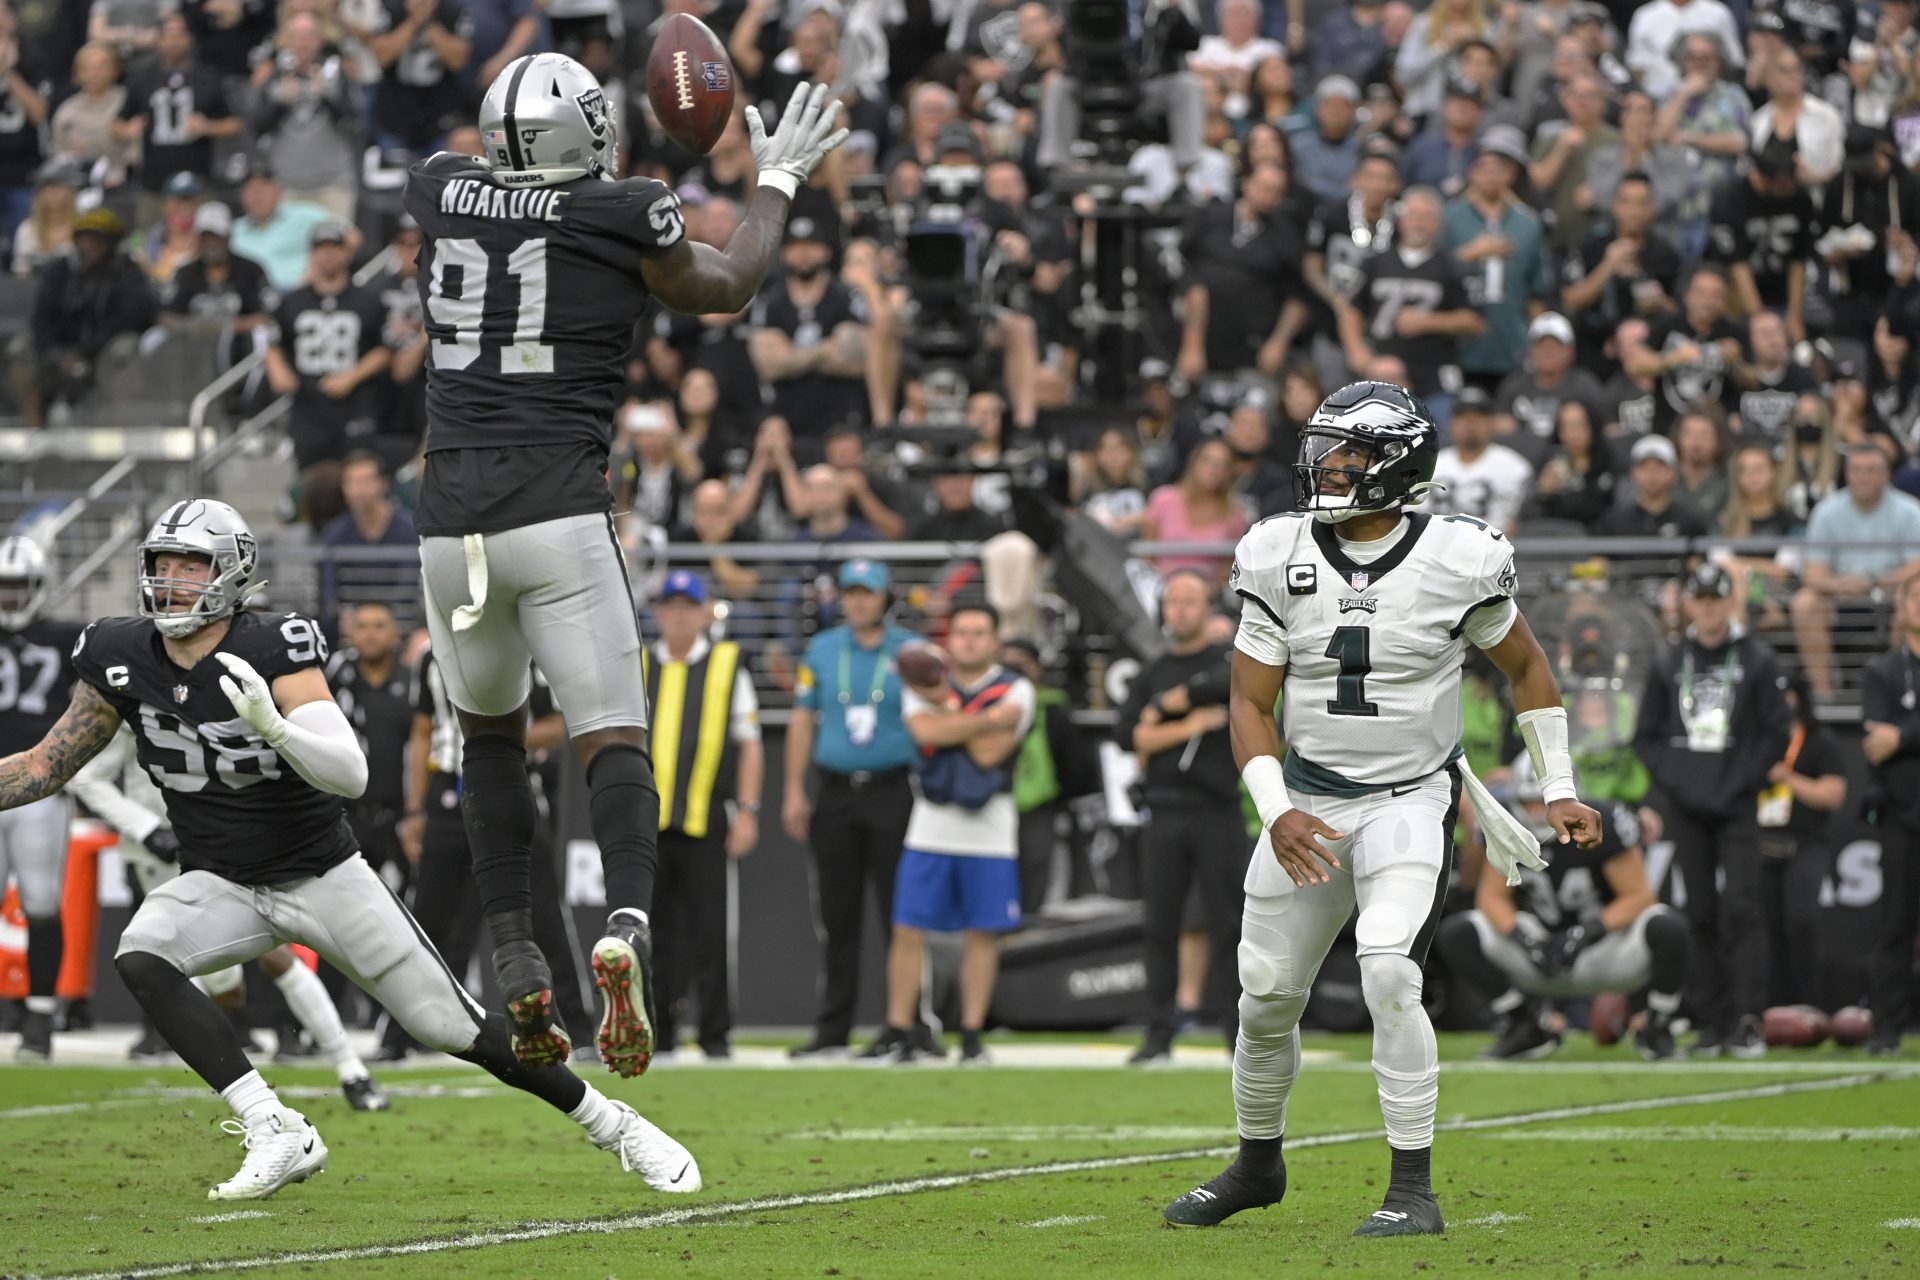 Las Vegas Raiders defensive end Yannick Ngakoue (91) blocks an attempted pass by Philadelphia Eagles quarterback Jalen Hurts (1) during the first half of an NFL football game, Sunday, Oct. 24, 2021, in Las Vegas.